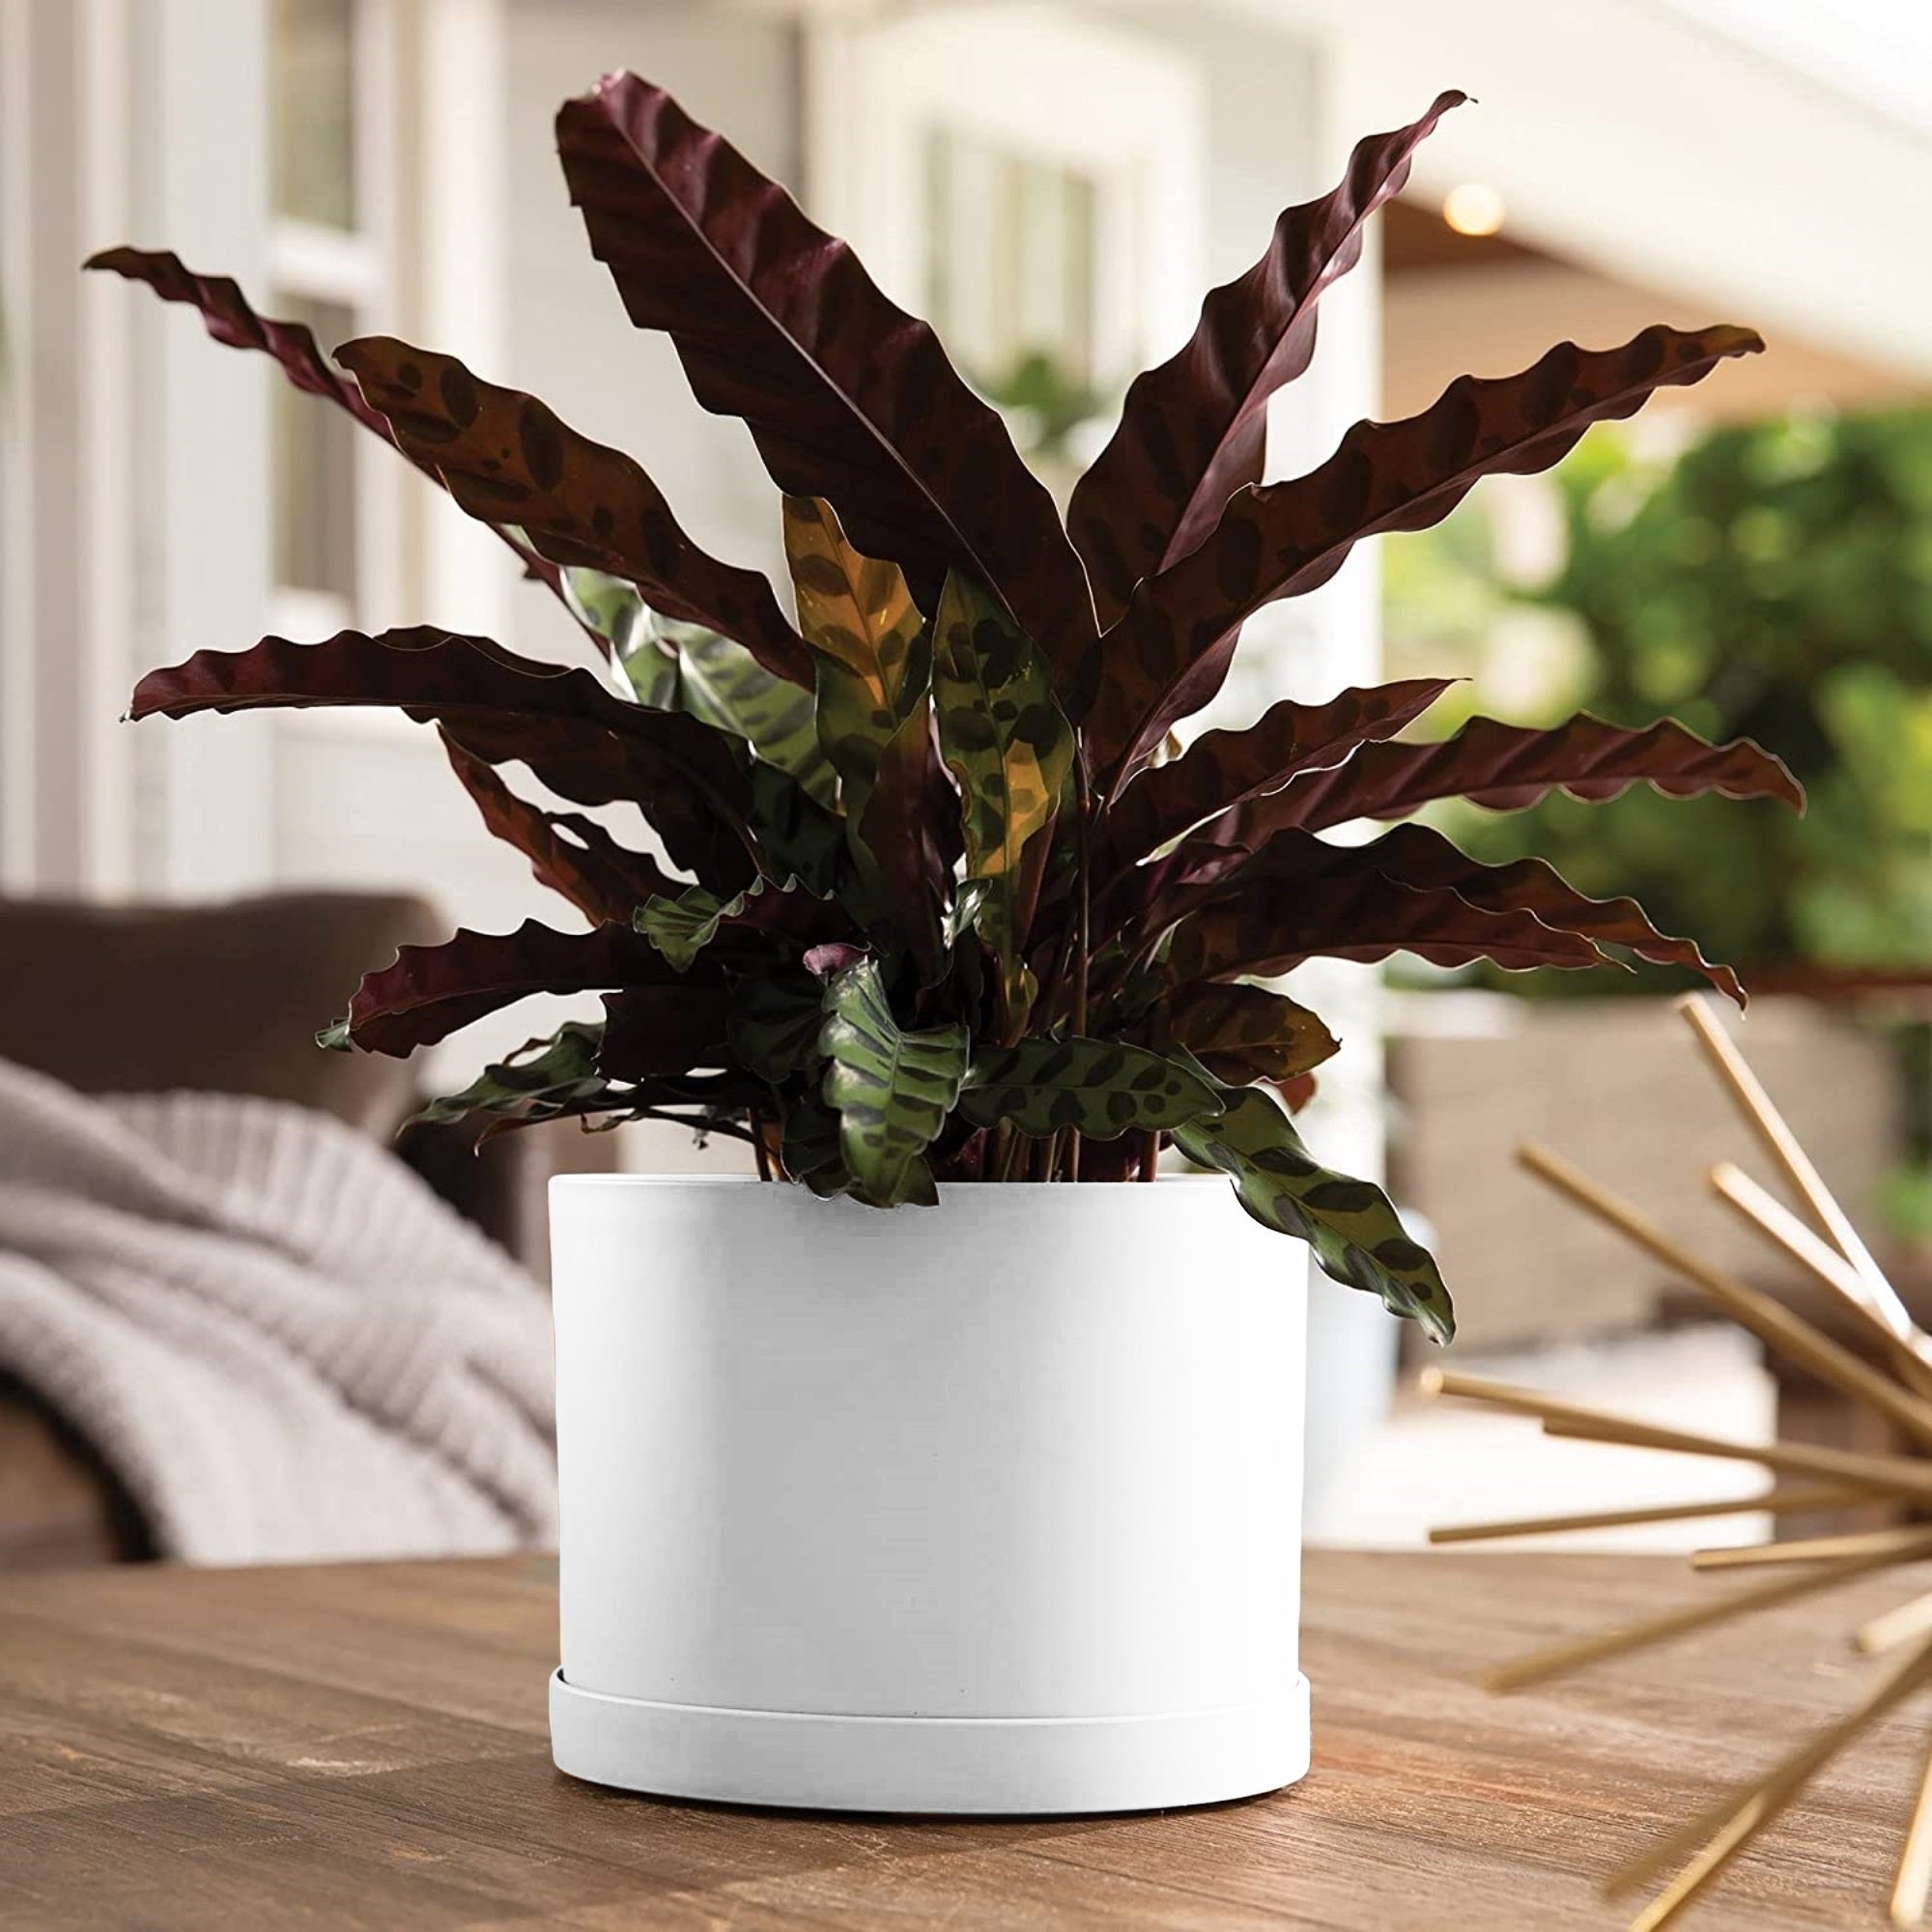 Bloem Mathers Round Plastic Planter with Saucer Tray